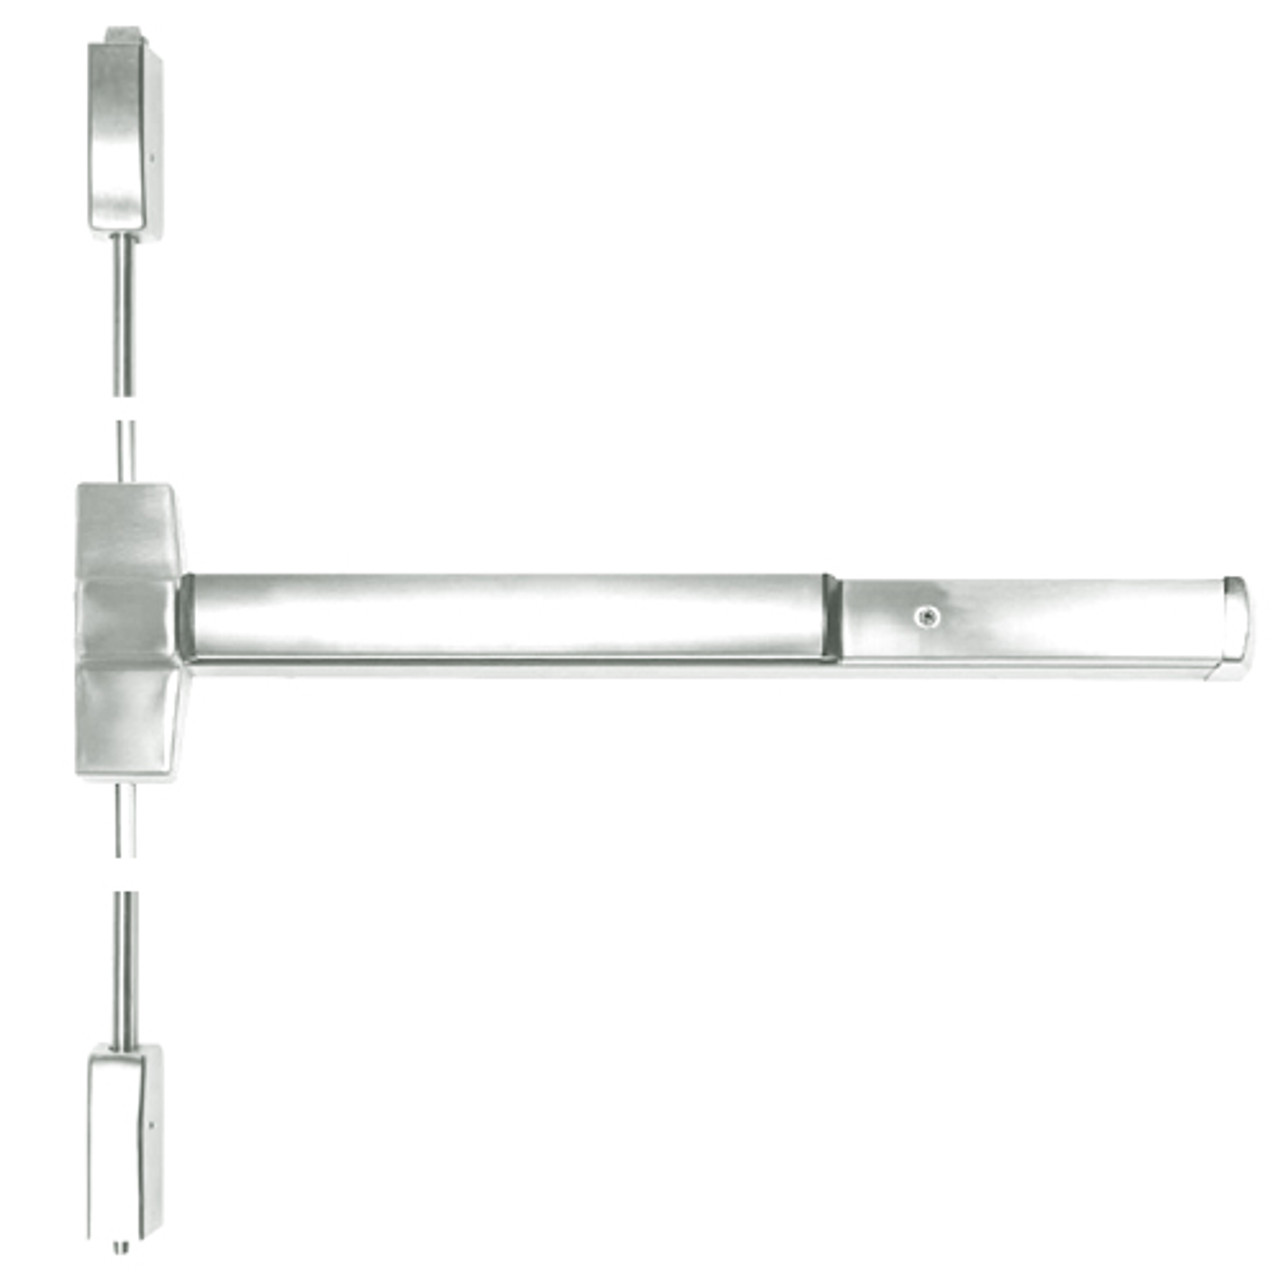 ED5470-618-MELR-M92 Corbin ED5400 Series Non Fire Rated Vertical Rod Exit Device with Motor Latch Retraction and Touchbar Monitoring in Bright Nickel Finish